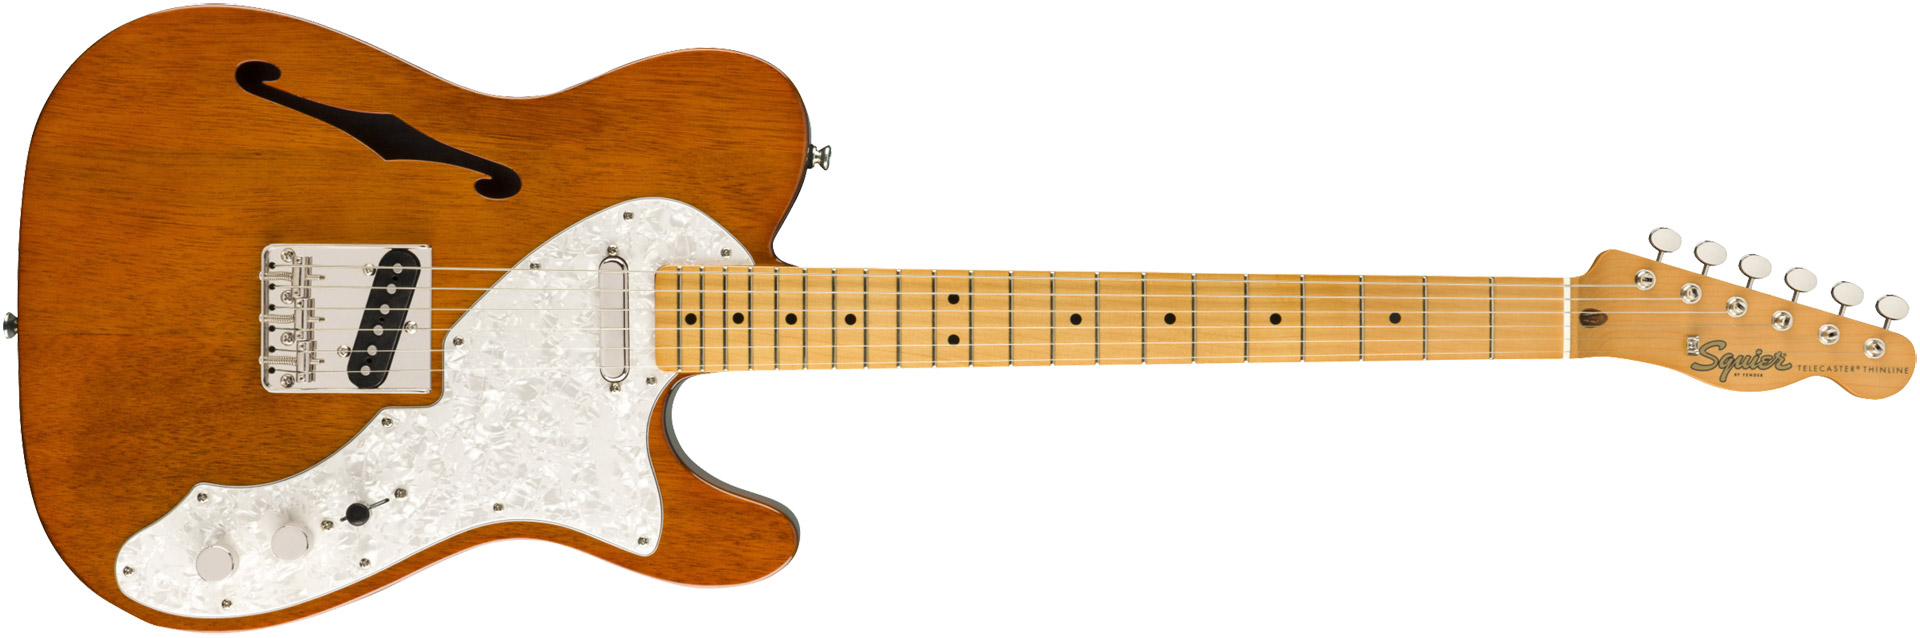 GUITARRA FENDER SQUIER CLASSIC VIBE 60S TELECASTER THINLINE MN - 037-4067-521 - NATURAL